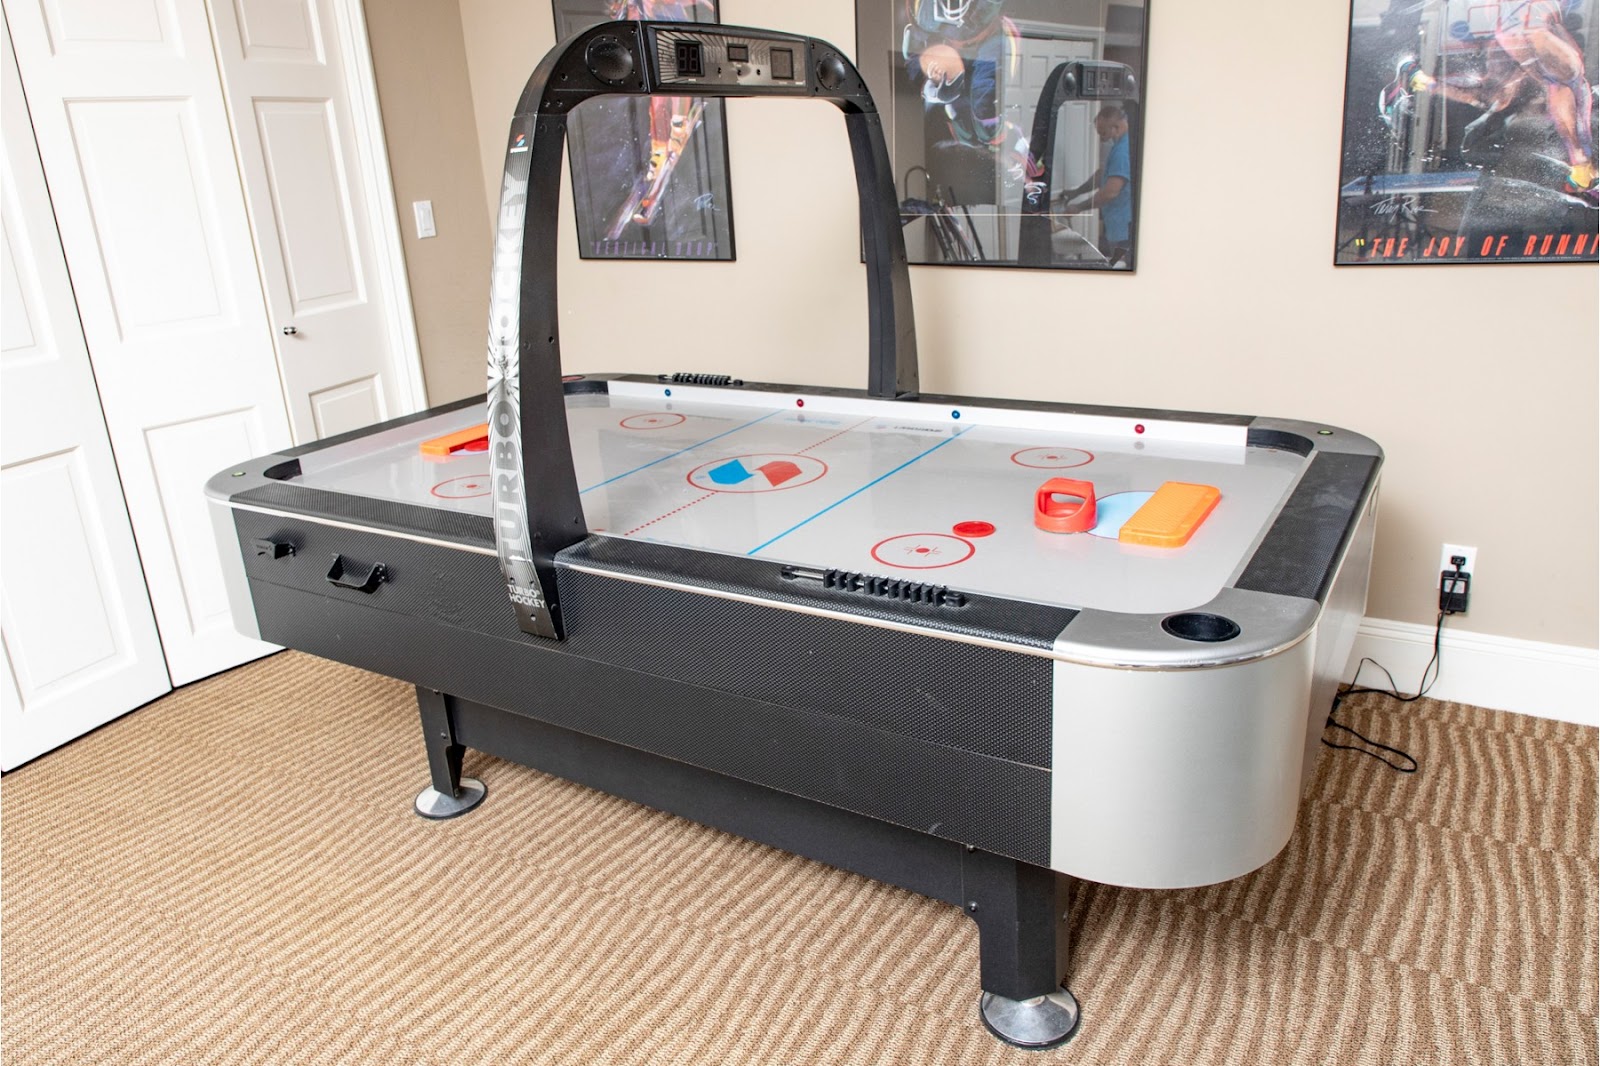 Sportcraft Turbo Air Hockey Game with Audio & Visual Effects